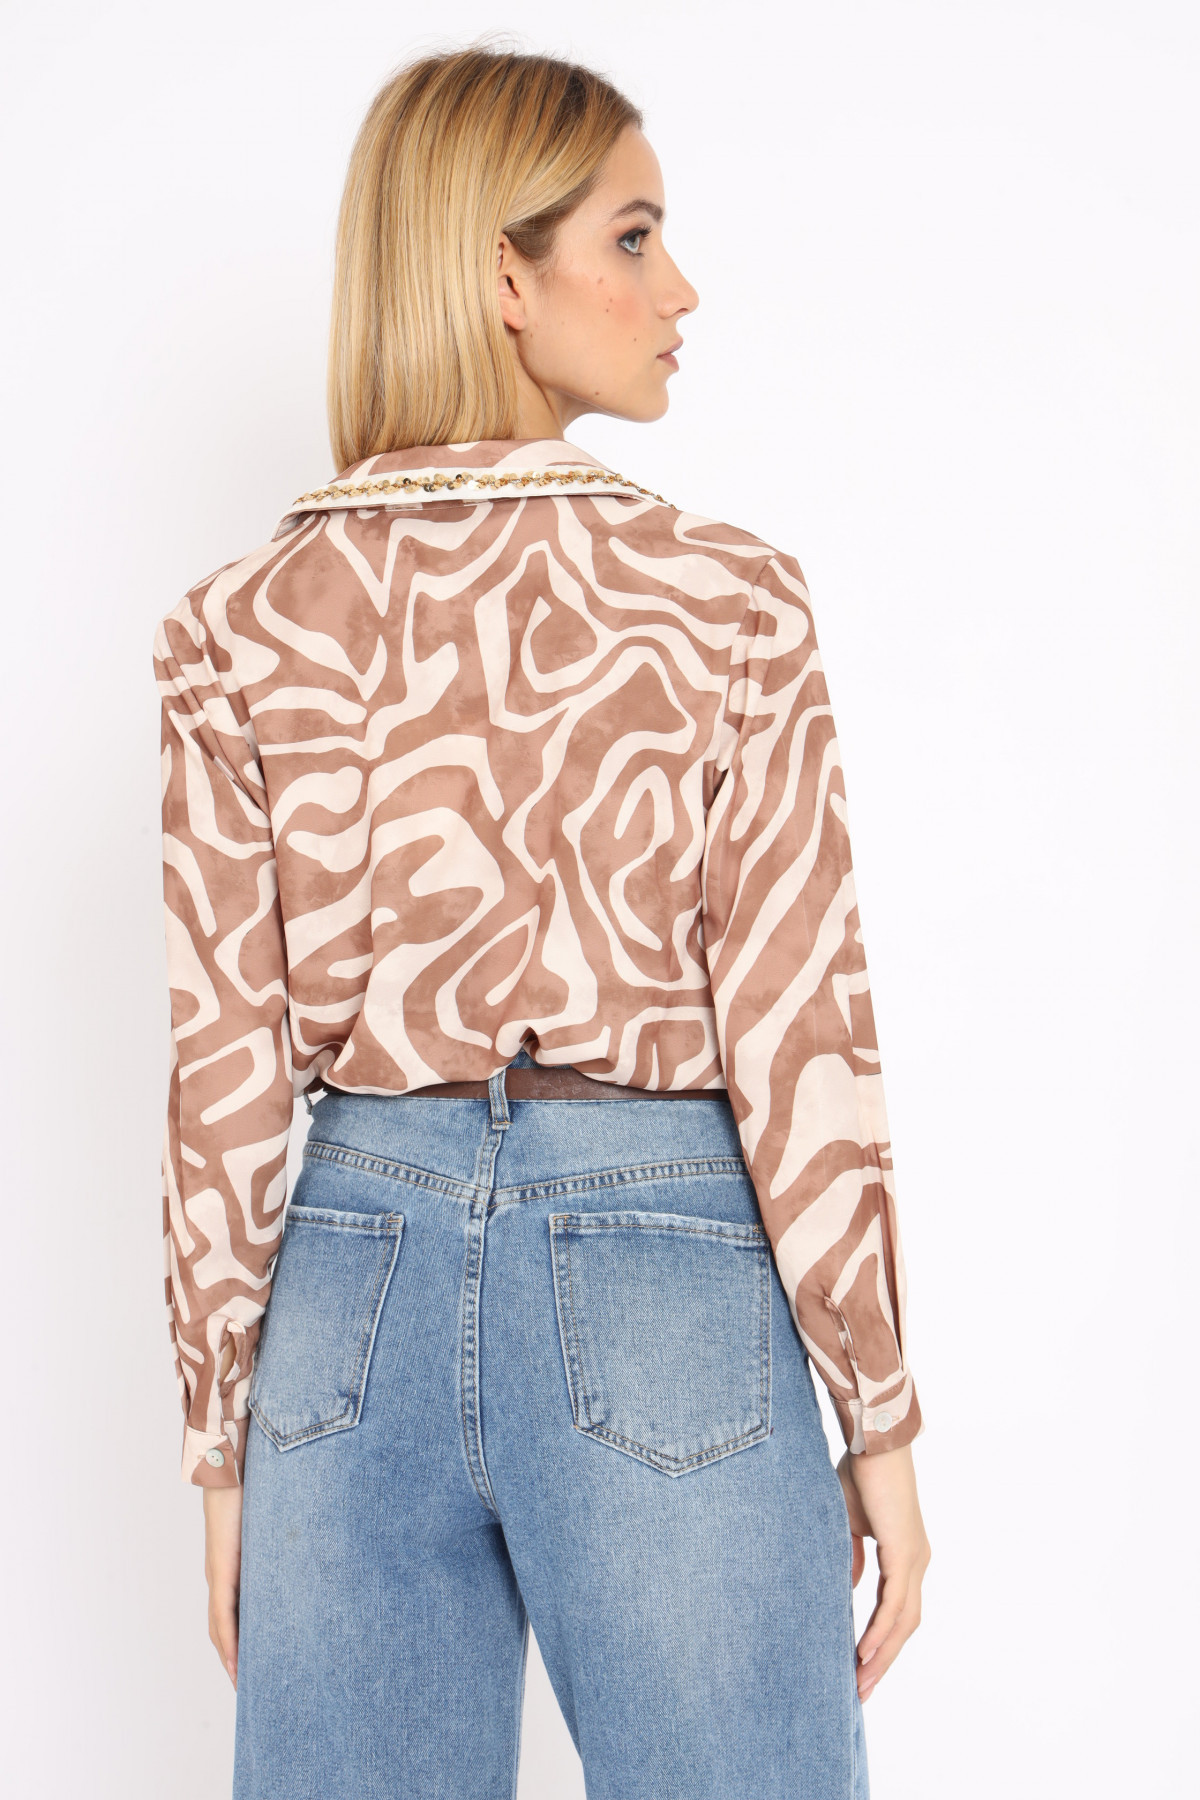 Variegated Patterned Shirt with Sequins Detail